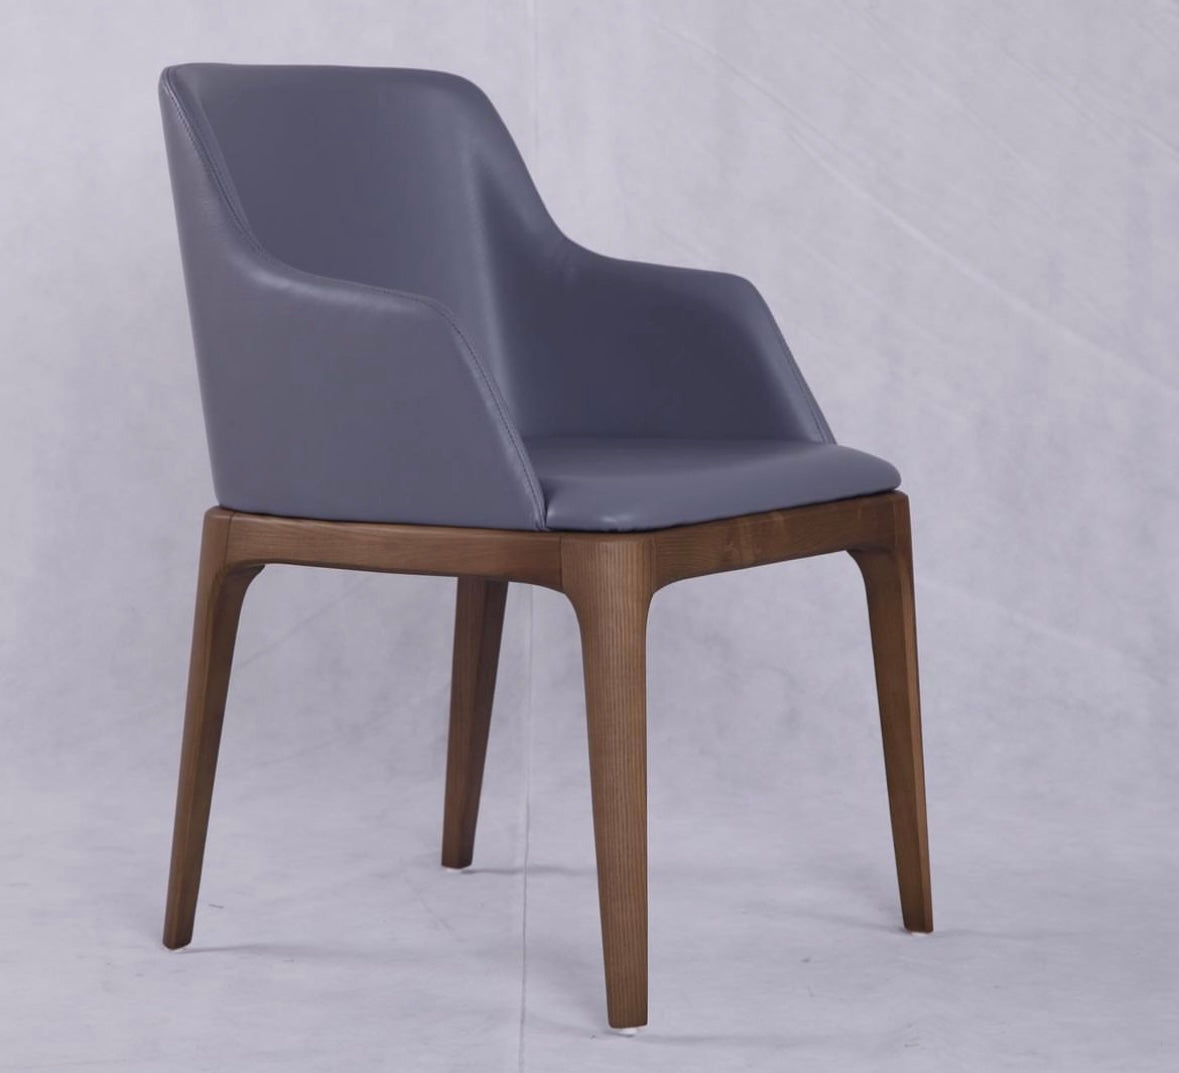 Grace dining chairs